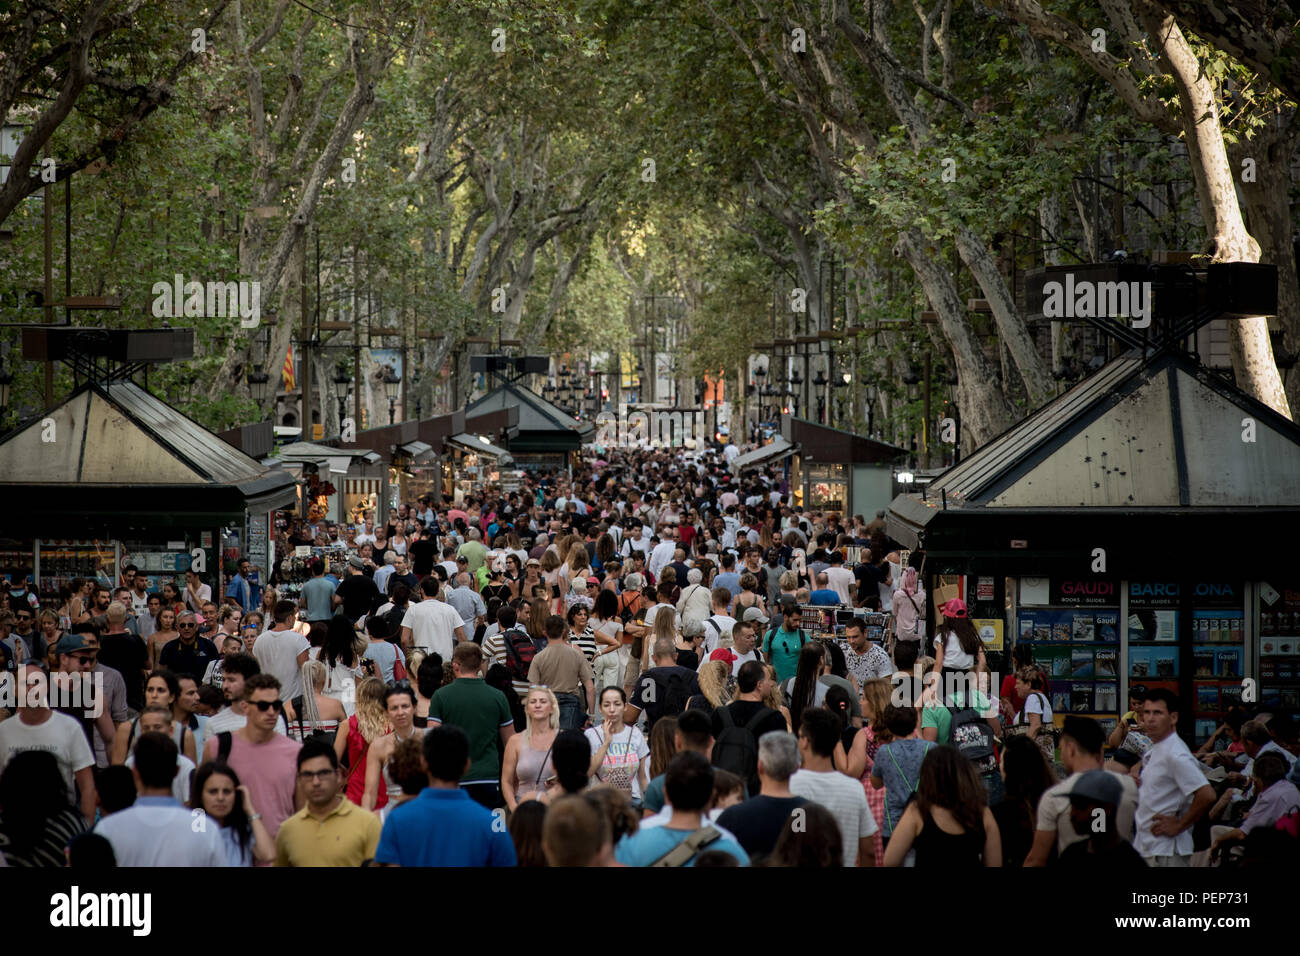 Barcelona, Spain. 16th August 2018.    People walk  Las Ramblas of Barcelona one day before the anniversary of  last year's terror attacks  wich killed  16 people and injured more than 120  when two vehicles crashed into the crowds. Credit:  Jordi Boixareu/Alamy Live News Stock Photo